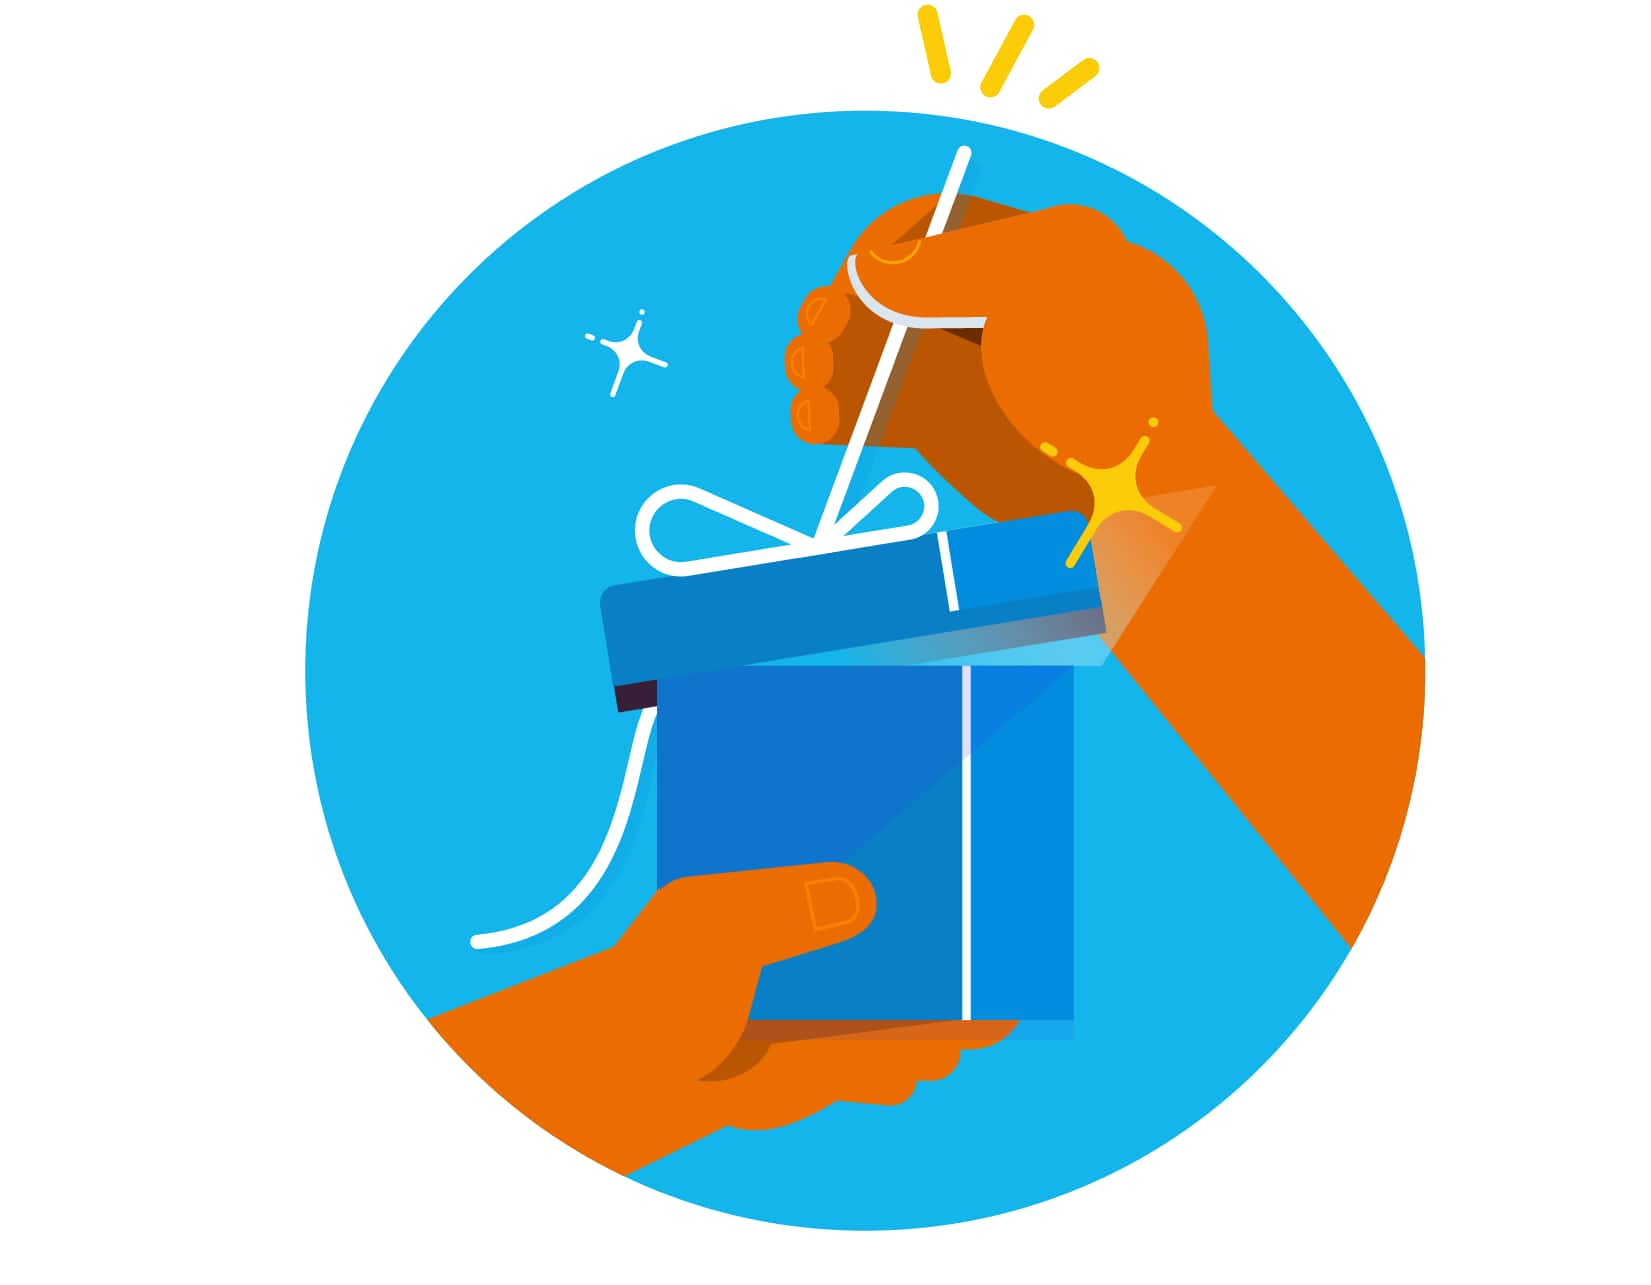  An illustration of a person unwrapping a gift box.